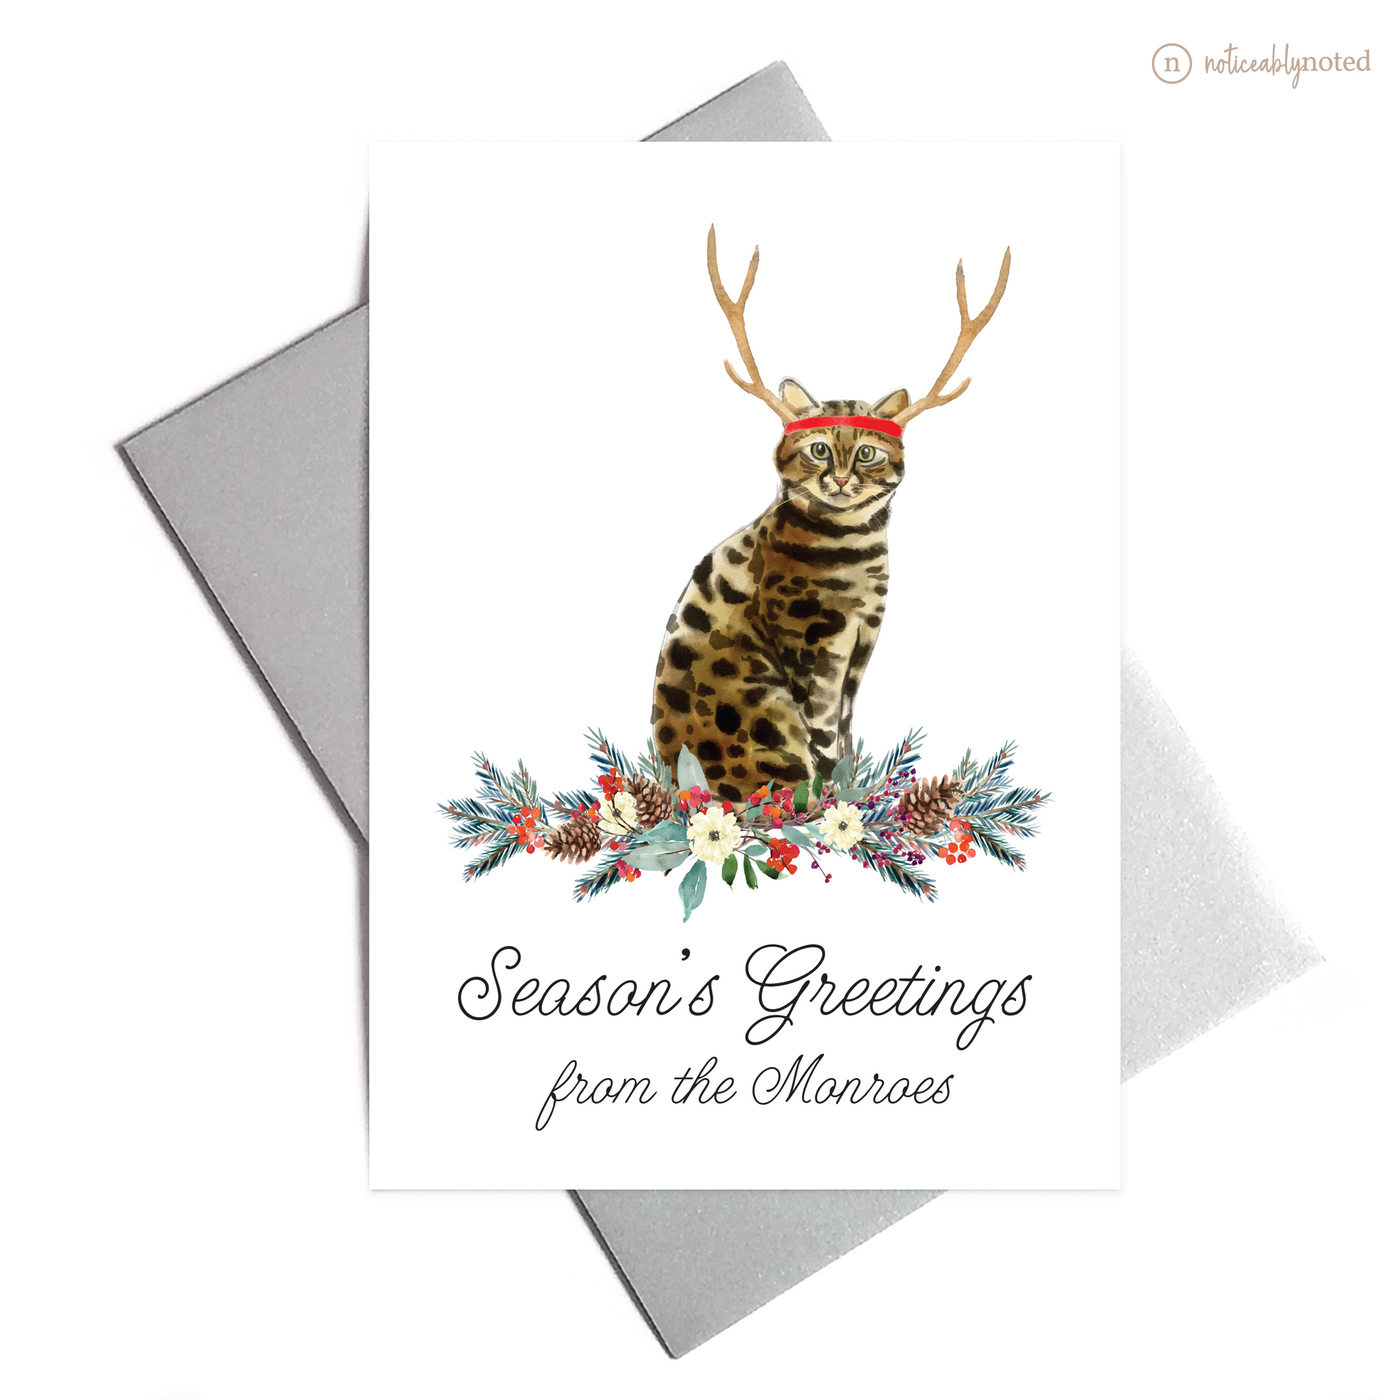 Bengal Christmas Cards | Noticeably Noted